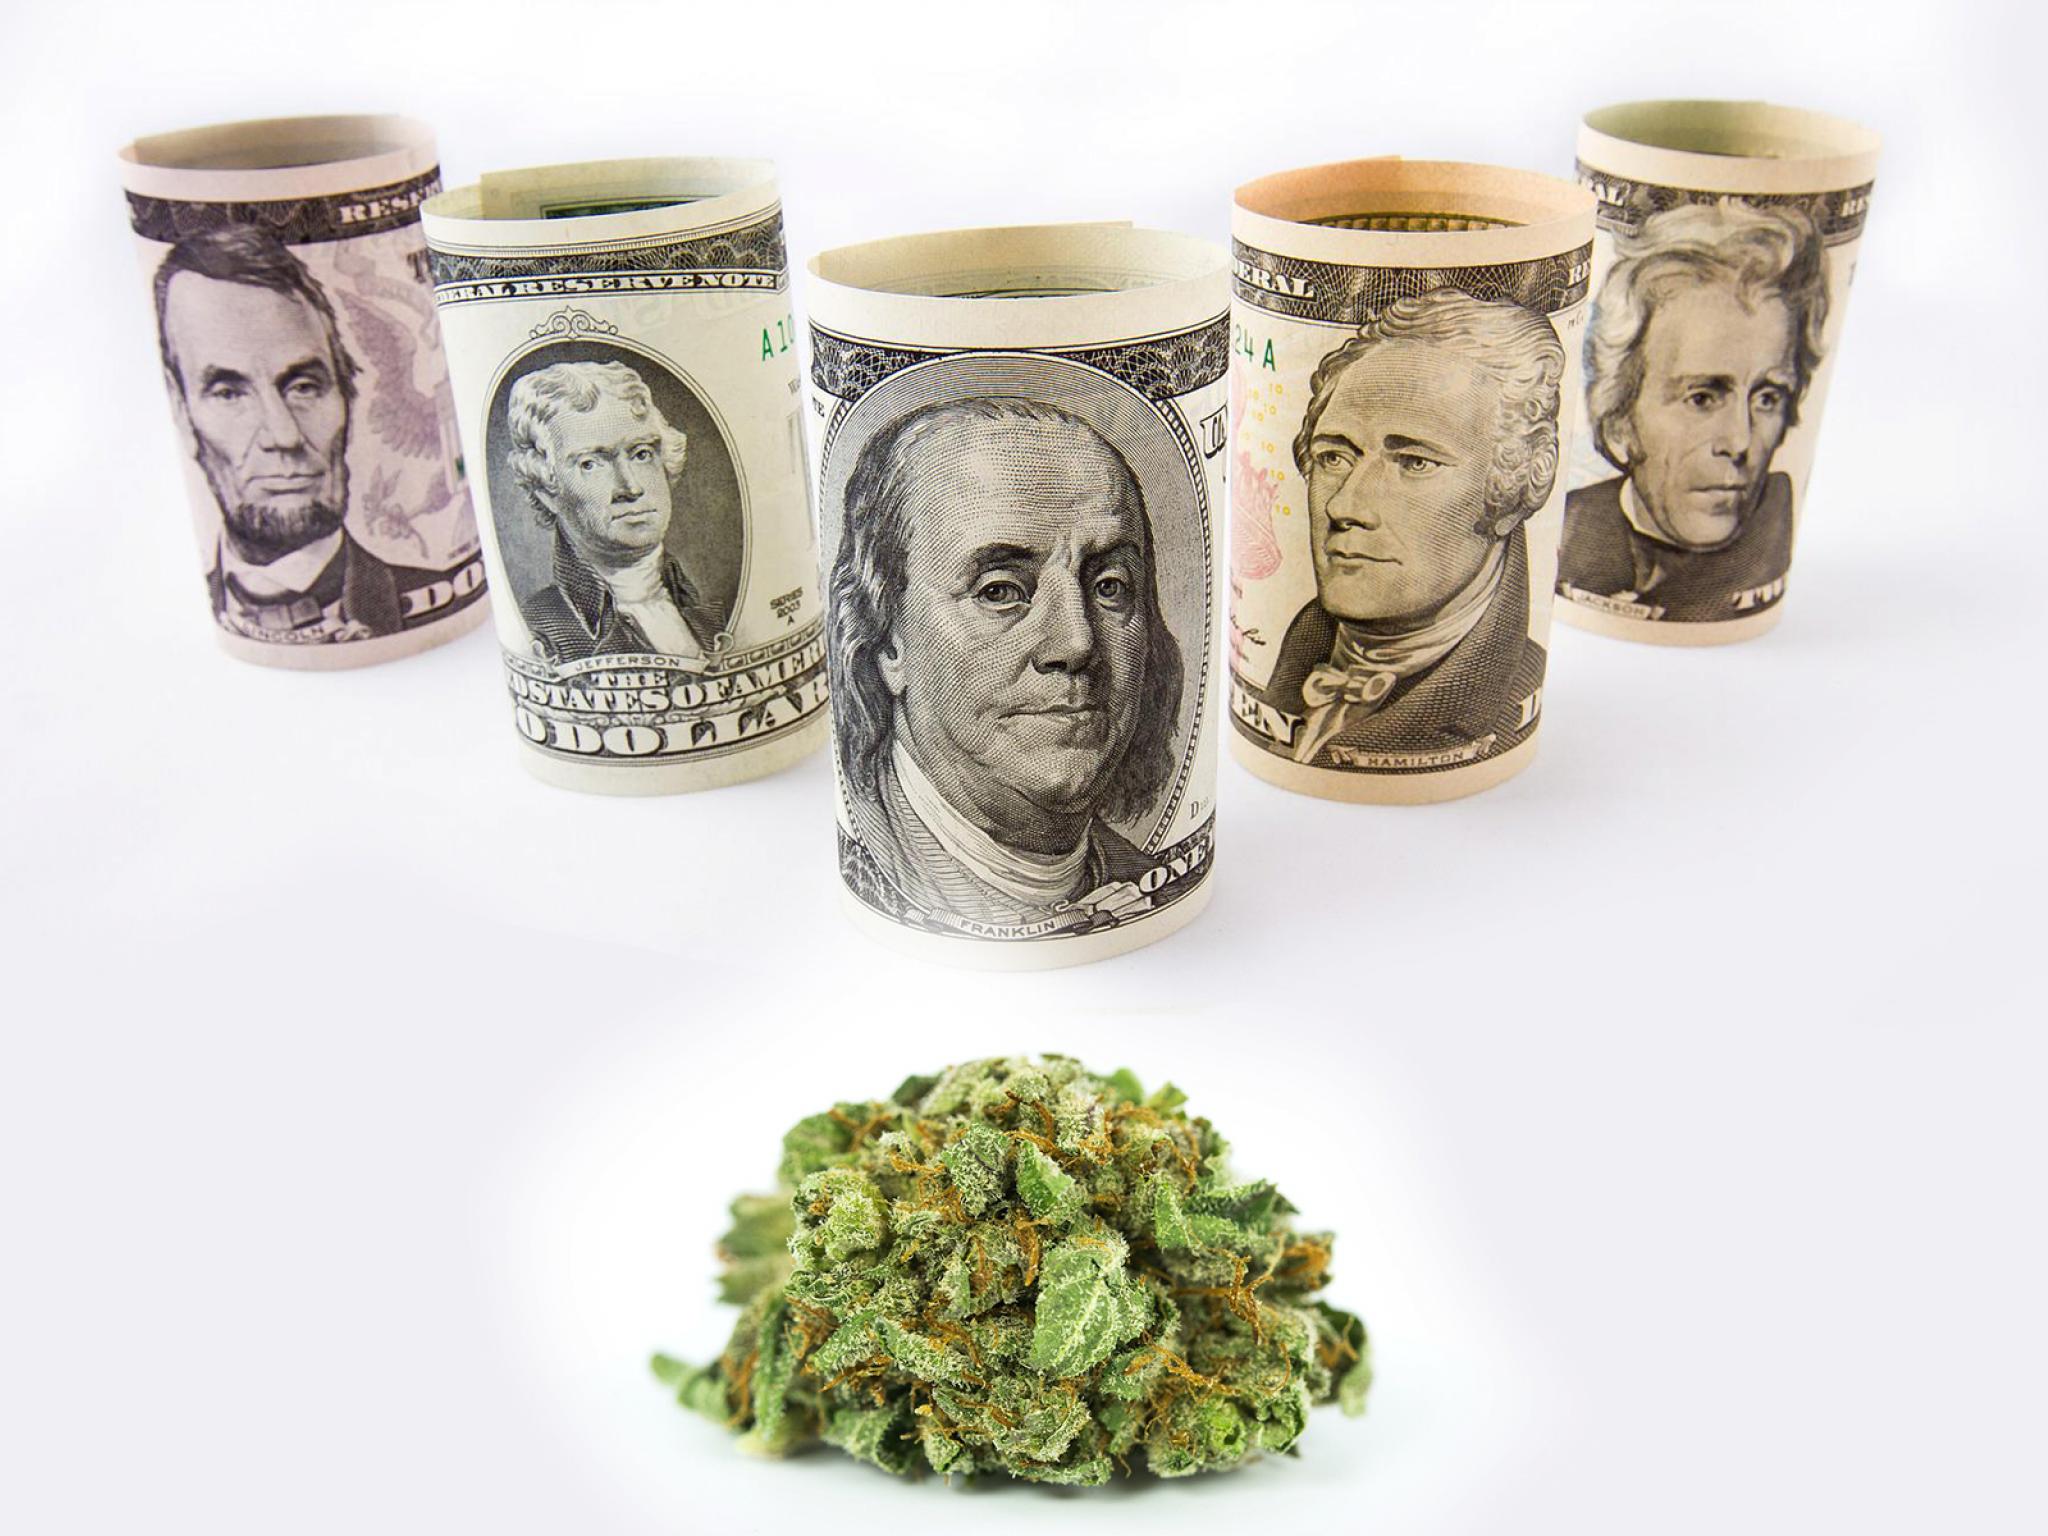  california-cannabis-producer-reports-revenue-challenges-in-q3-as-gross-margins-improve-yoy 